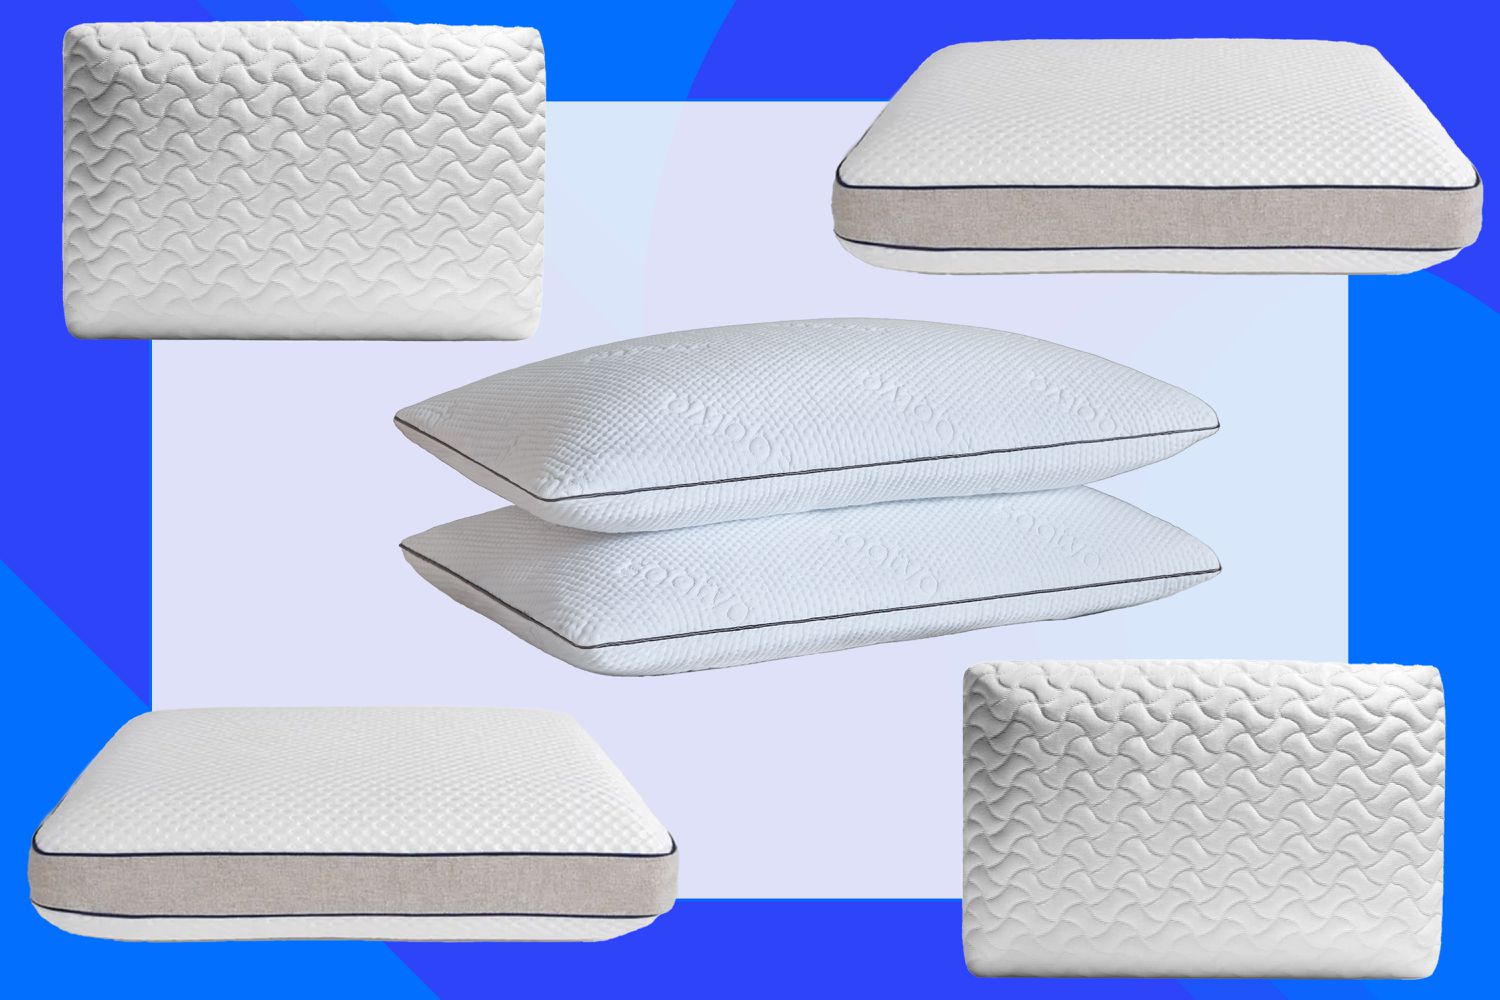 How To Use A Memory Foam Pillow | Storables